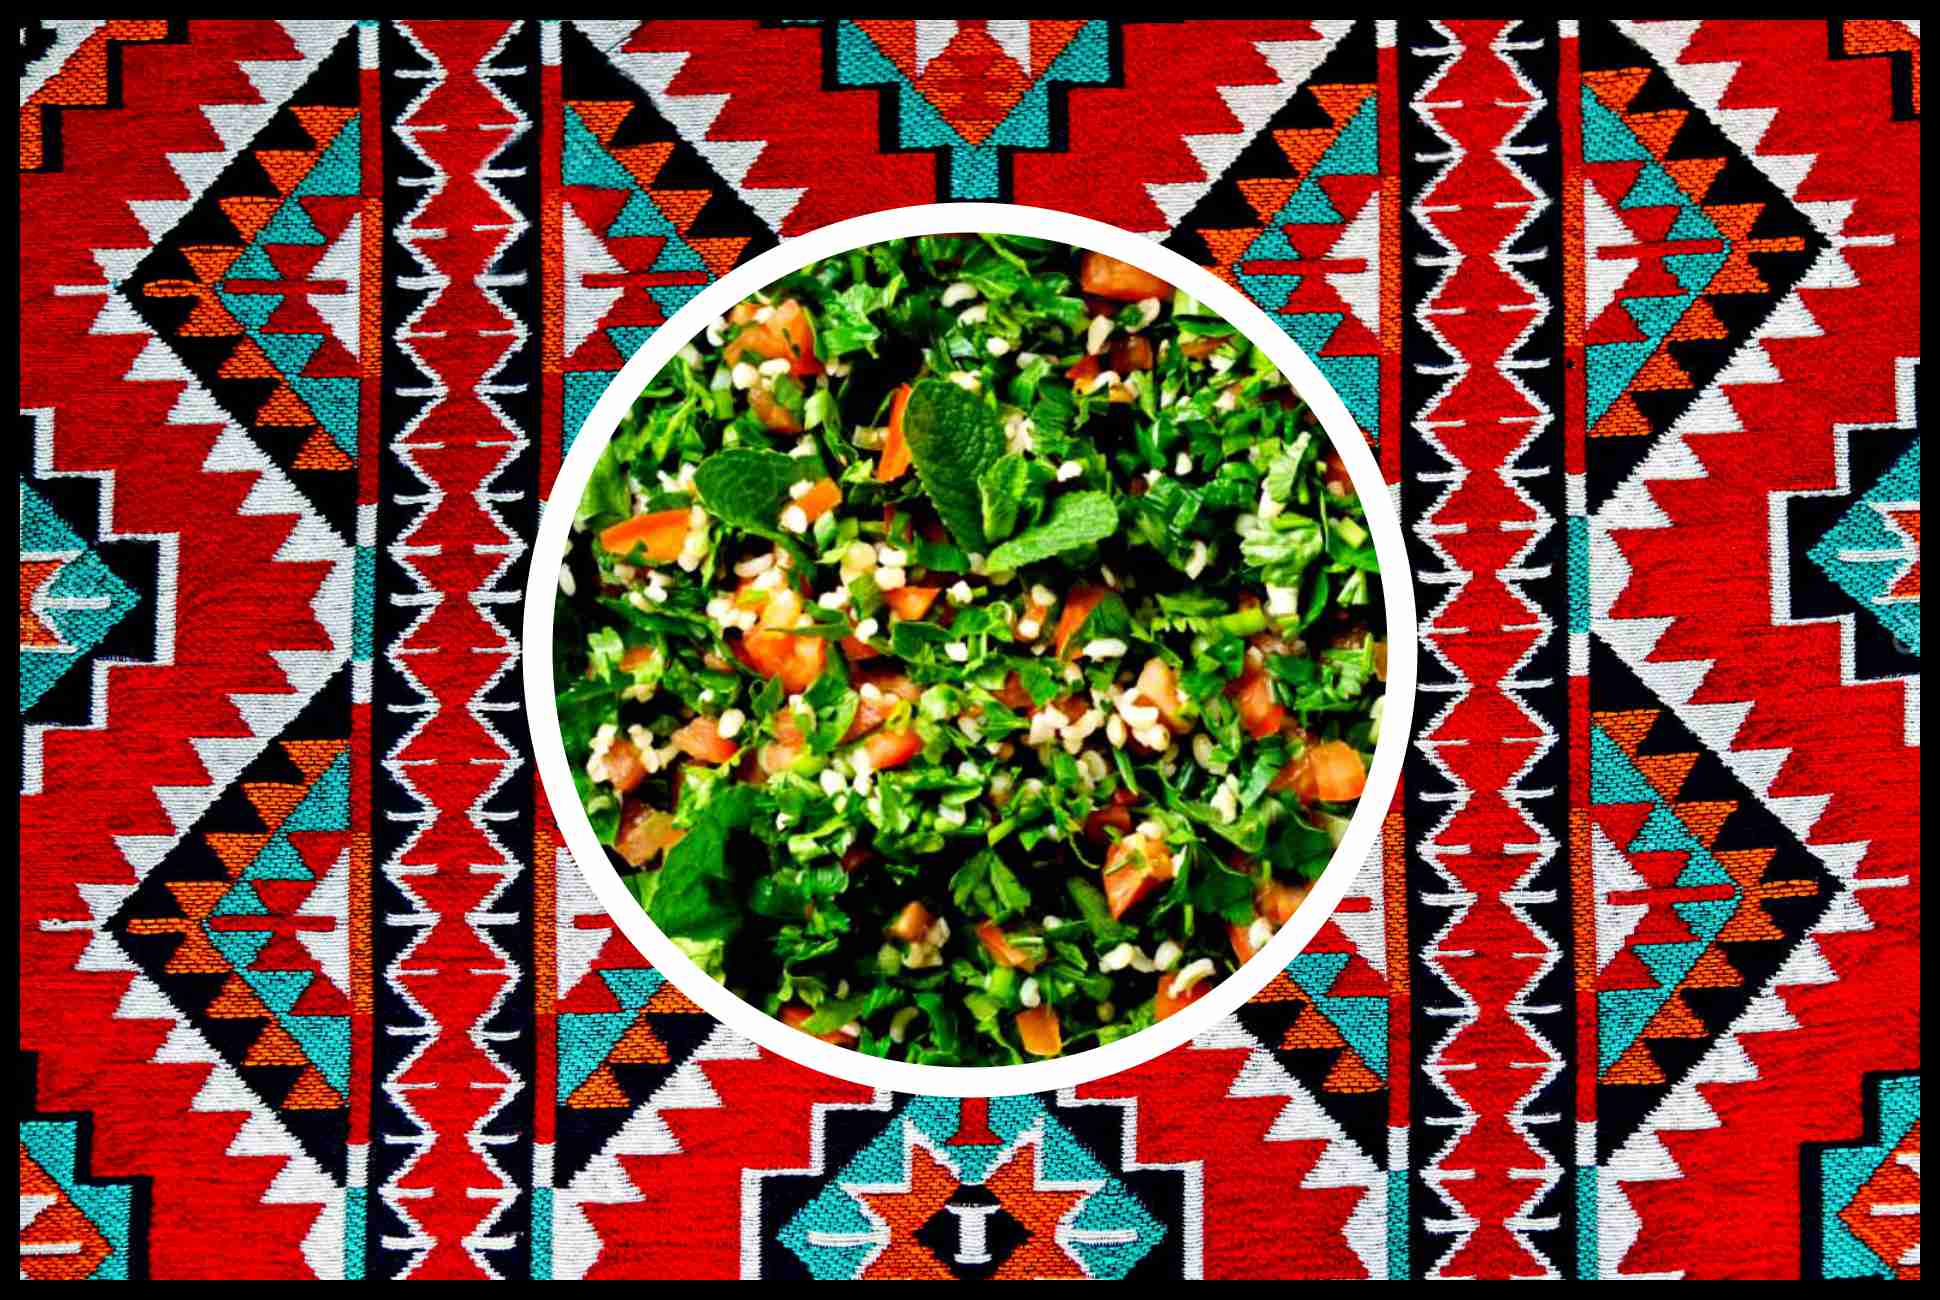 Tabbouleh Salad; My Mom's Recipe; Petra Culinary; Middle Eastern Cuisine; Authentic Tabbouleh; Gourmet Salad; Petra Dining; Culinary Excellence; Fresh Ingredients; Petra Specialties; Culinary Adventure; Unique Salad Variety; Flavorful Tabbouleh; Best Tabbouleh in Petra; Palate Pleasers; Petra's Culinary Scene; Tabbouleh Medley; Locally-Sourced Ingredients; Gourmet Exploration; Fine Dining; Petra's Tabbouleh Delight; Gastronomic Pleasure.